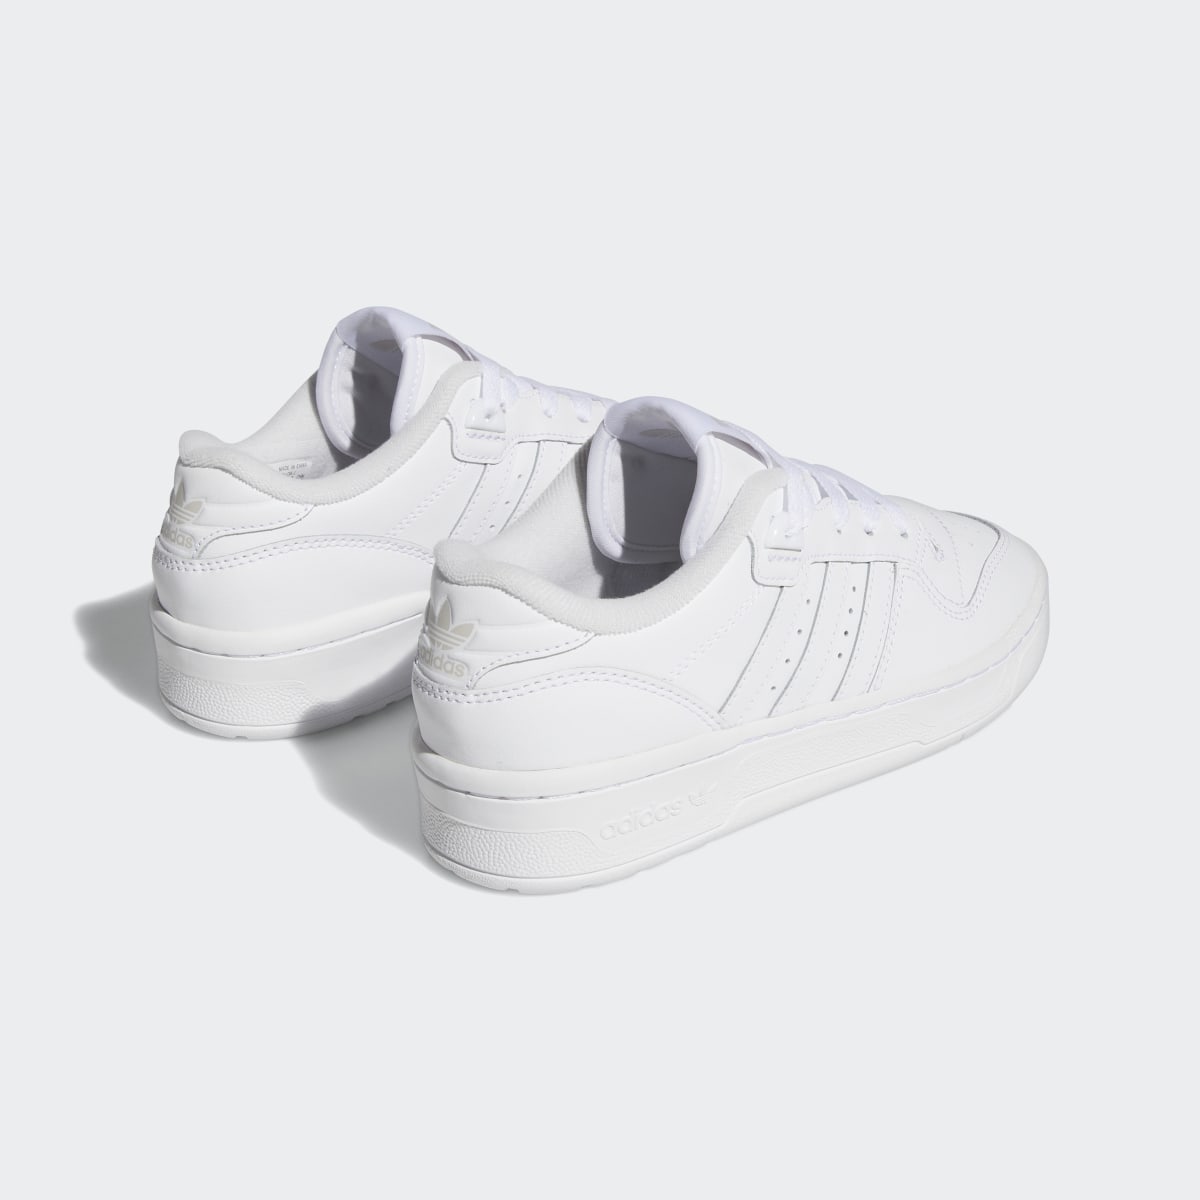 Adidas Rivalry Low Shoes Kids. 6